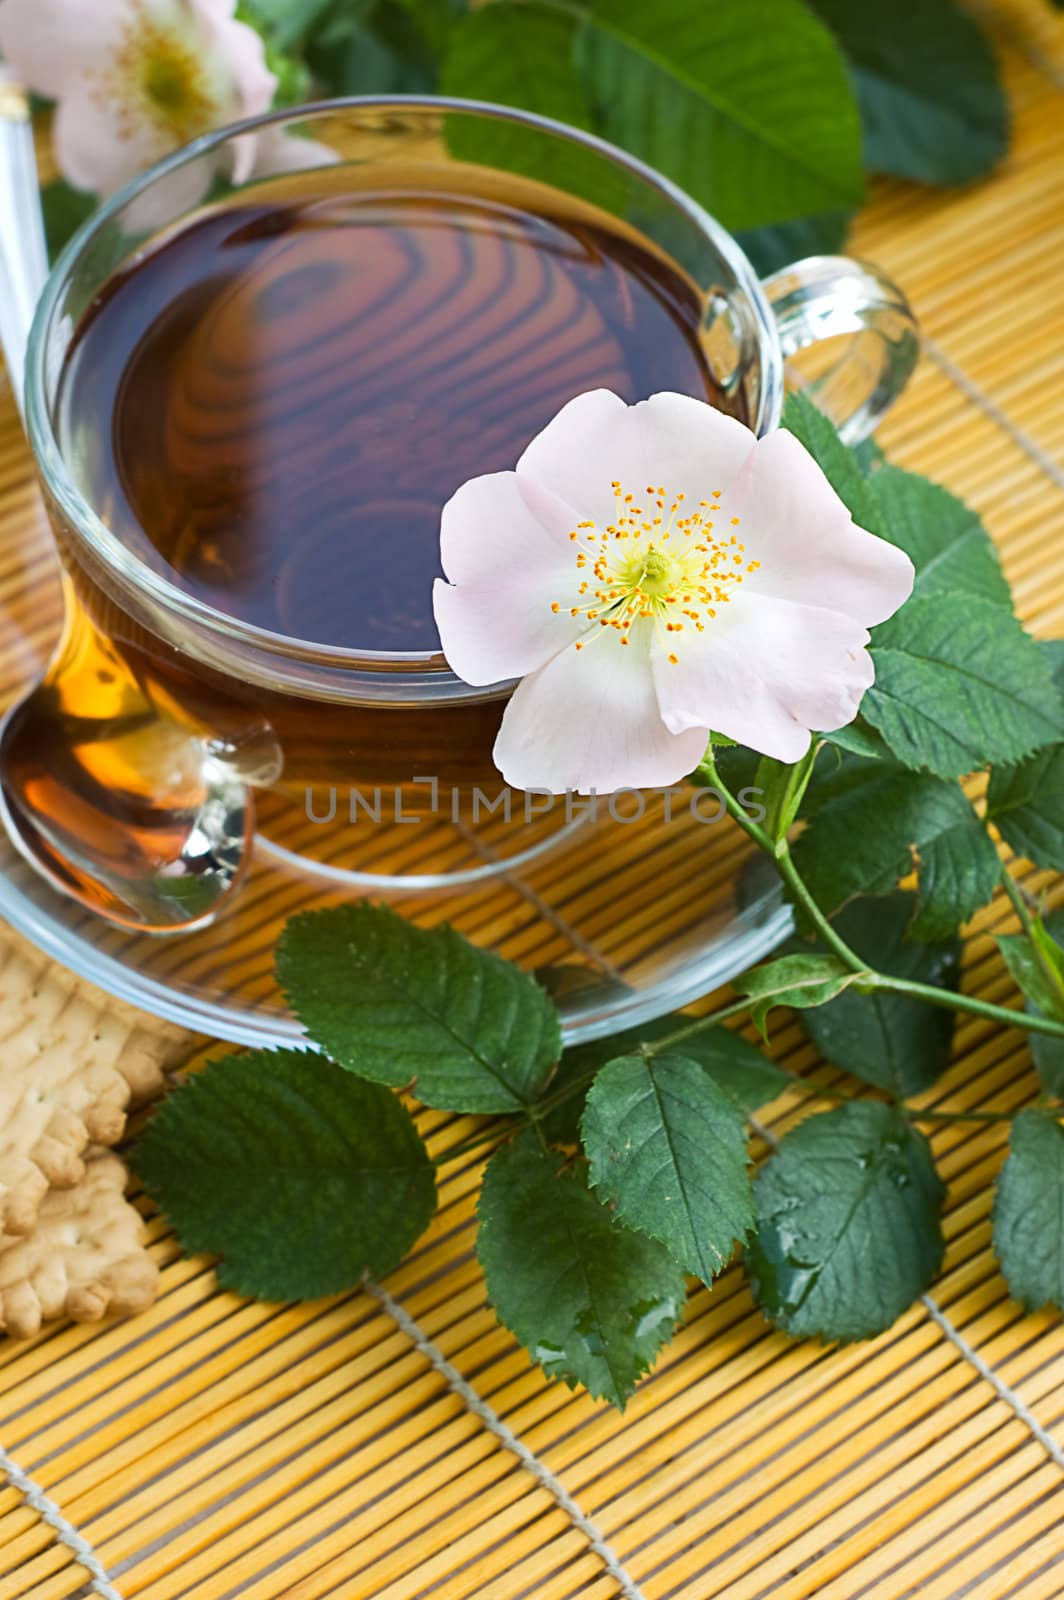 Tea with dog-rose  by Angel_a